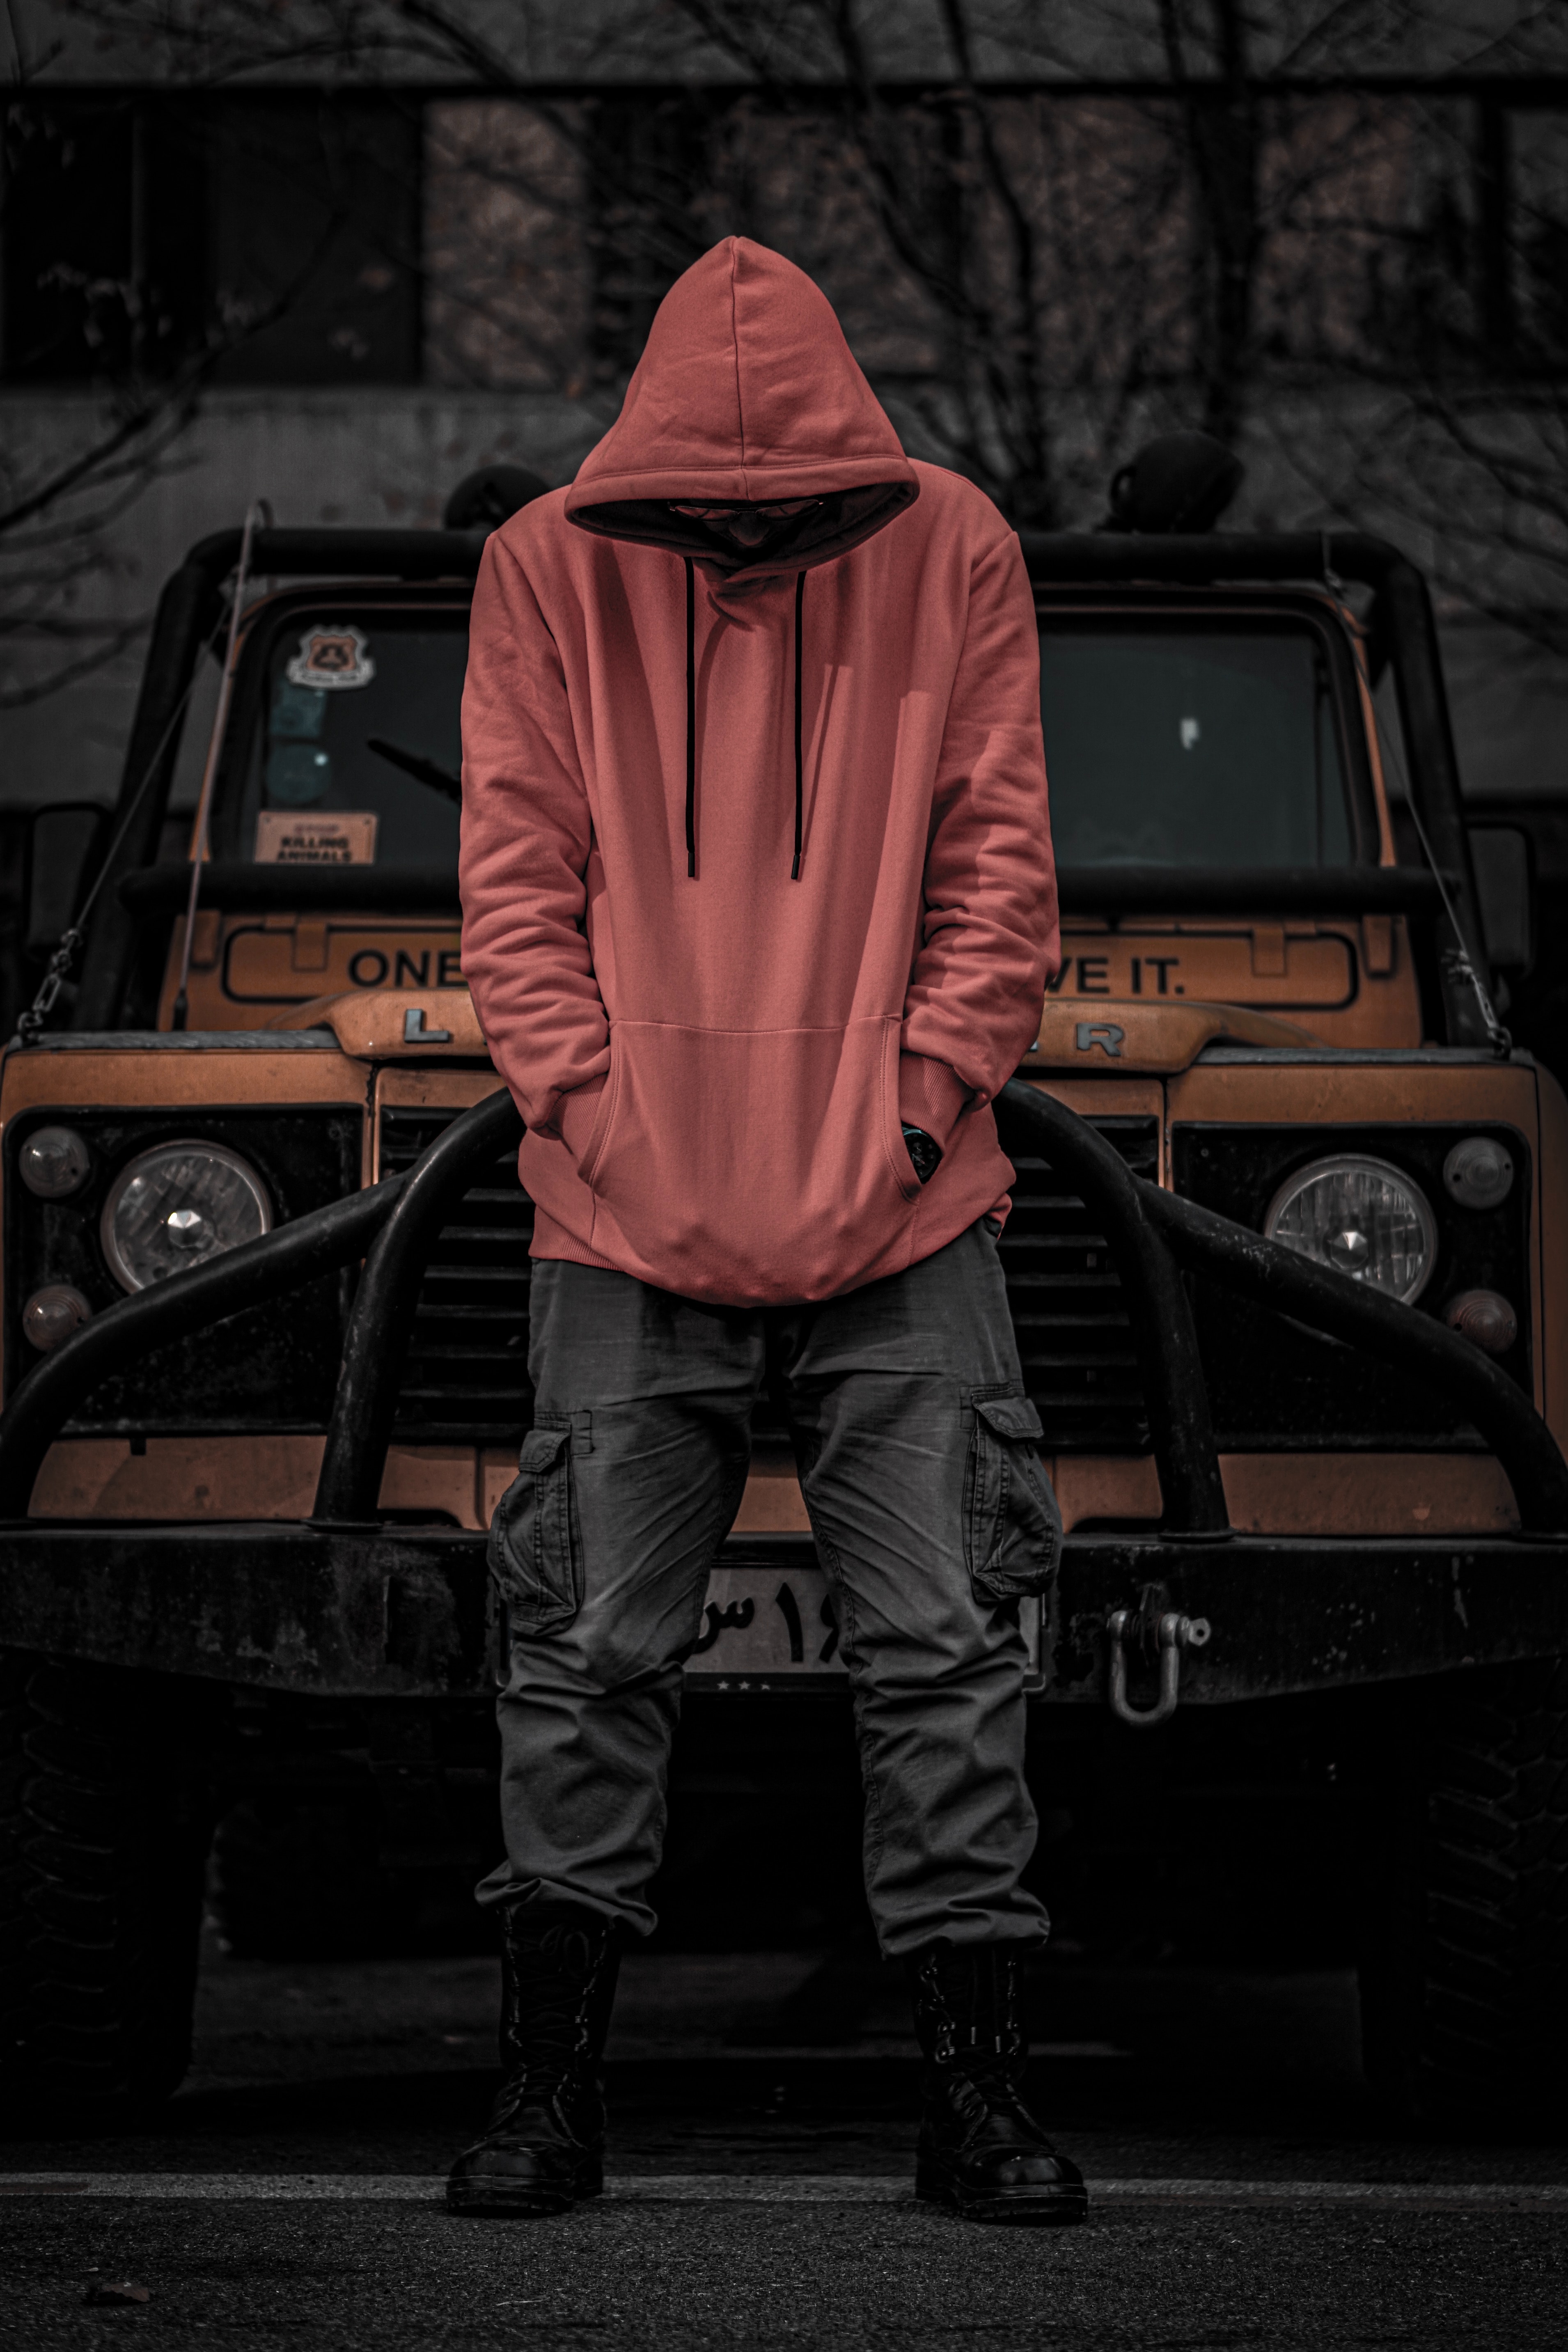 125750 Screensavers and Wallpapers Hood for phone. Download hood, miscellanea, miscellaneous, car, jeep, machine, human, person, hoodie, hoodies pictures for free